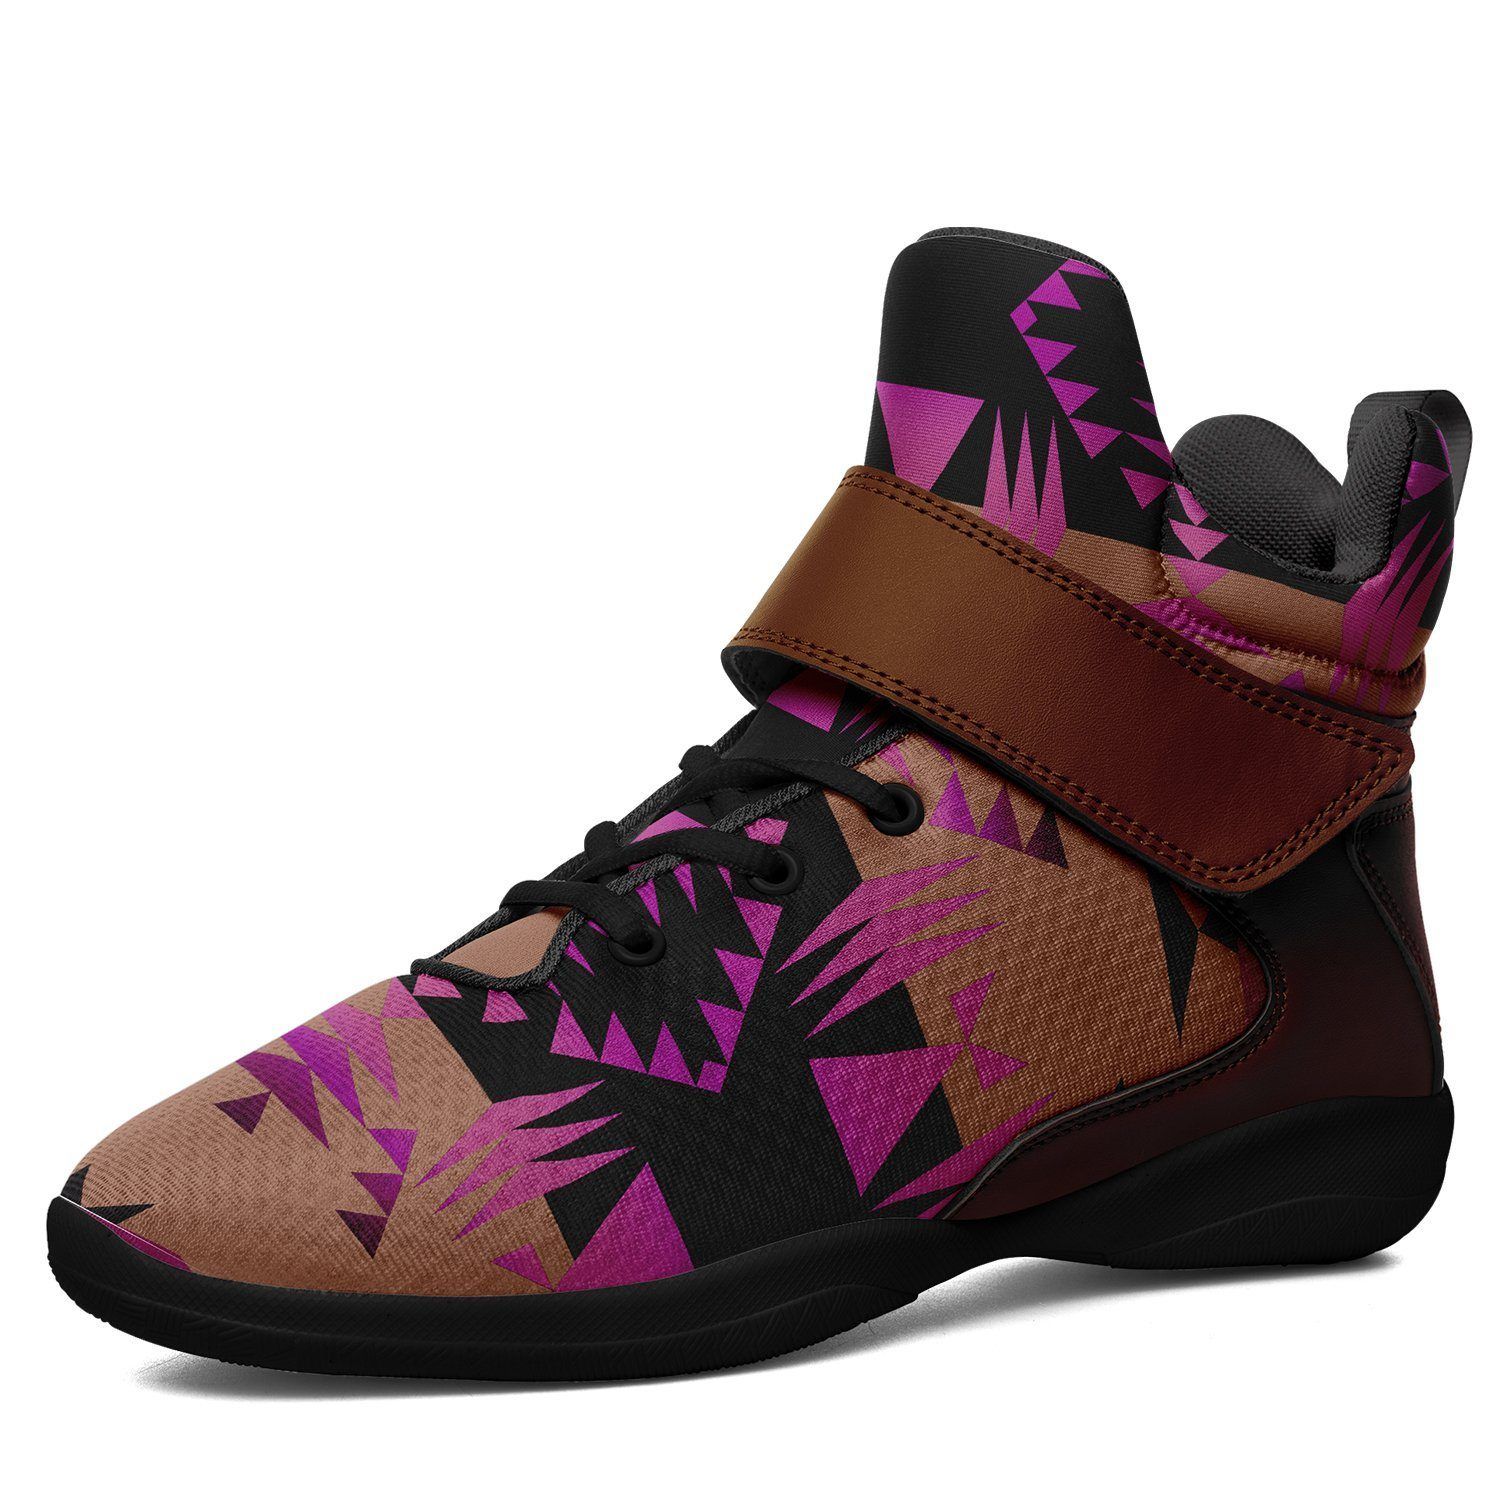 Between the Mountains Berry Kid's Ipottaa Basketball / Sport High Top Shoes 49 Dzine US Women 4.5 / US Youth 3.5 / EUR 35 Black Sole with Brown Strap 